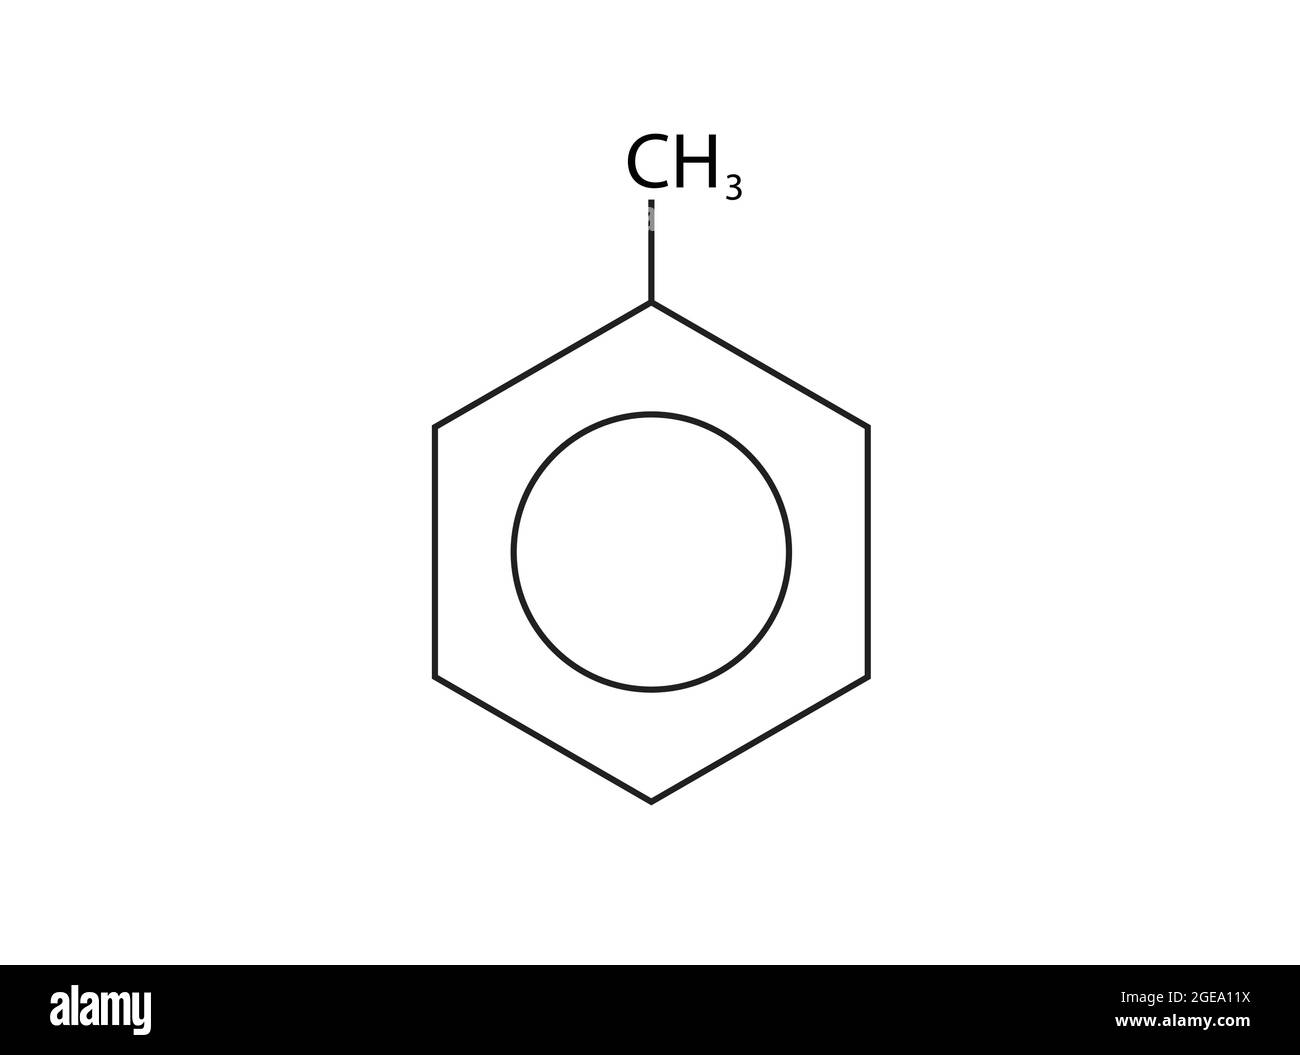 Chemical Structure of methylbenzene, Anatomy Of methylbenzene, Molecular structure of methylbenzene, Chemical formula of methylbenzene Stock Vector